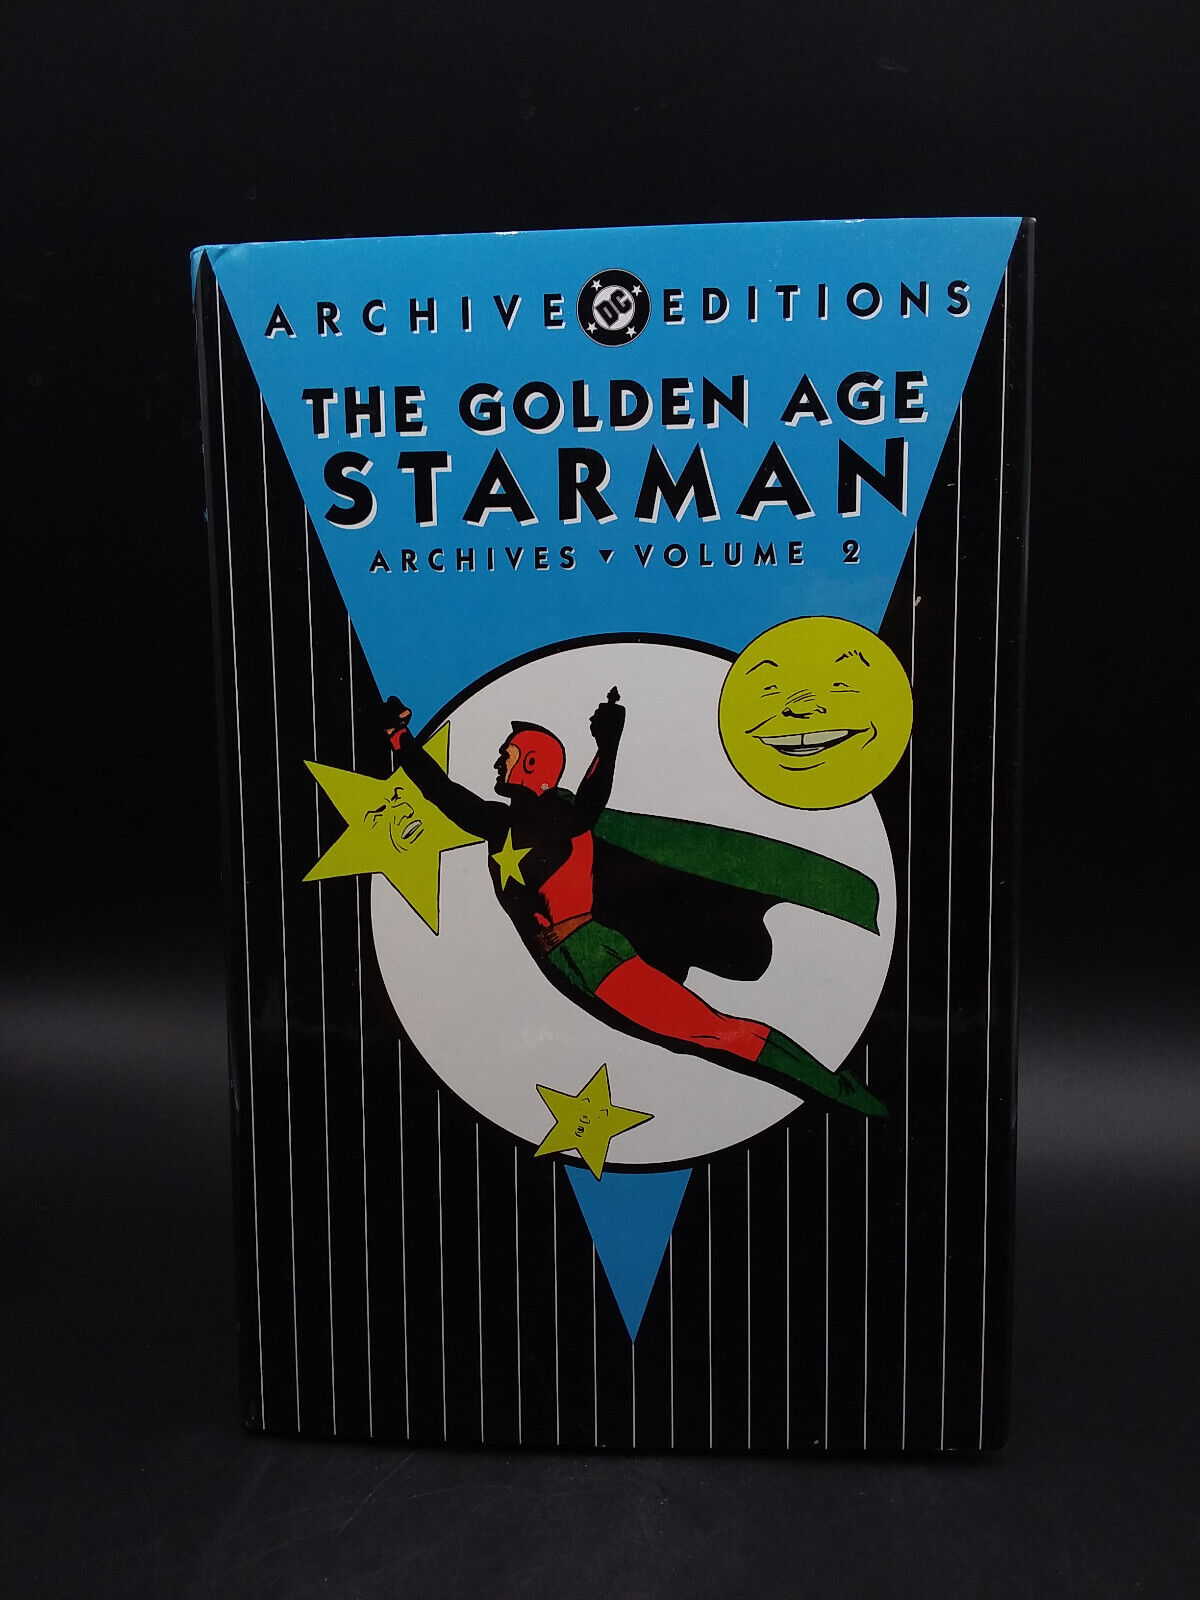 DC Archive Editions THE GOLDEN AGE STARMAN Archives volume 2